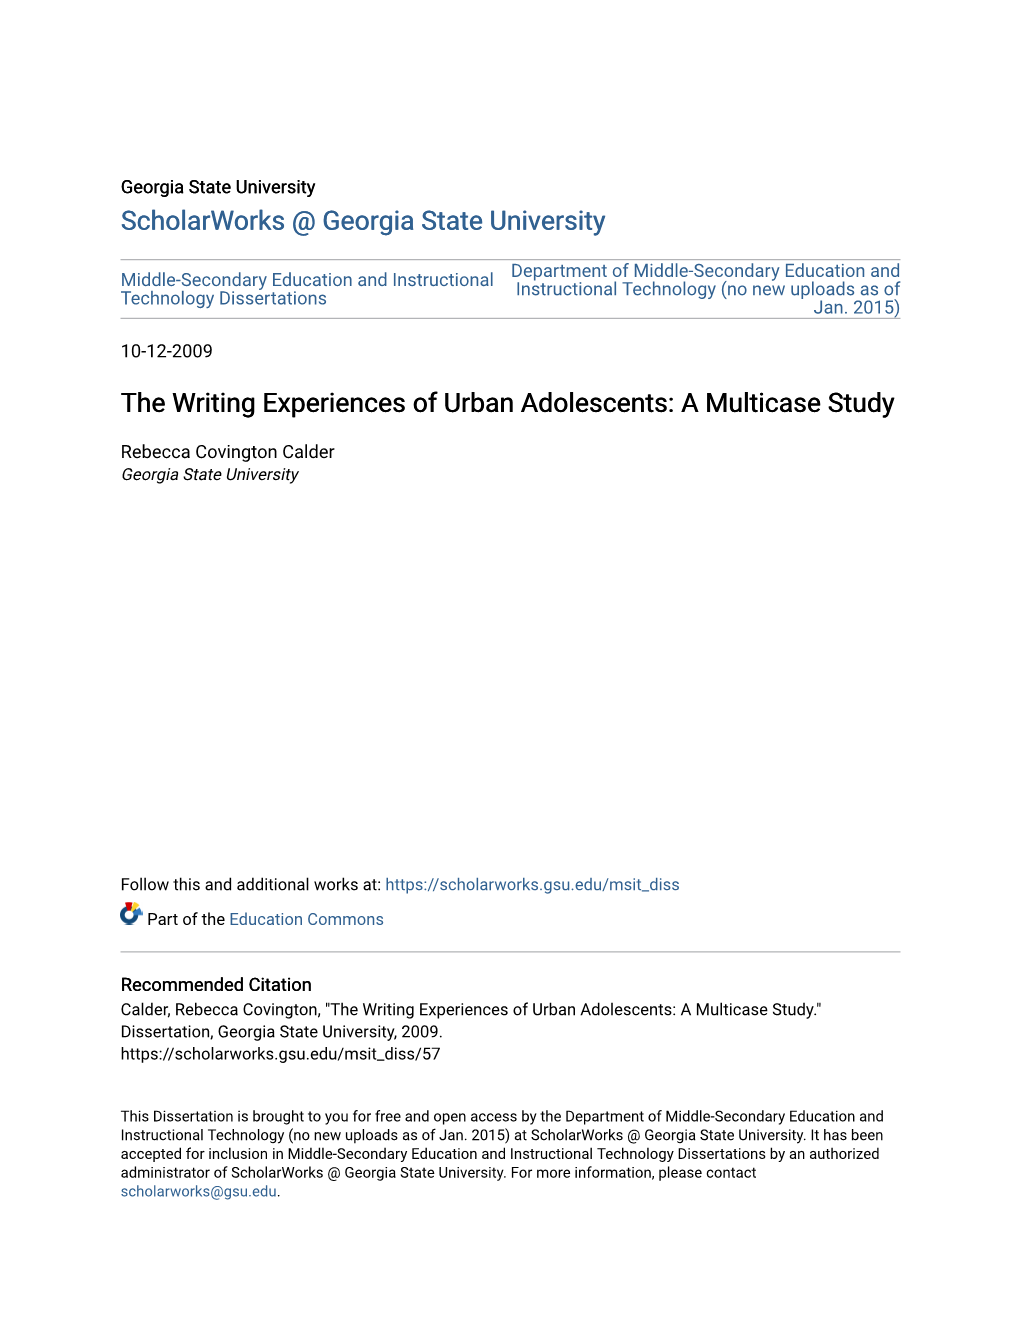 The Writing Experiences of Urban Adolescents: a Multicase Study